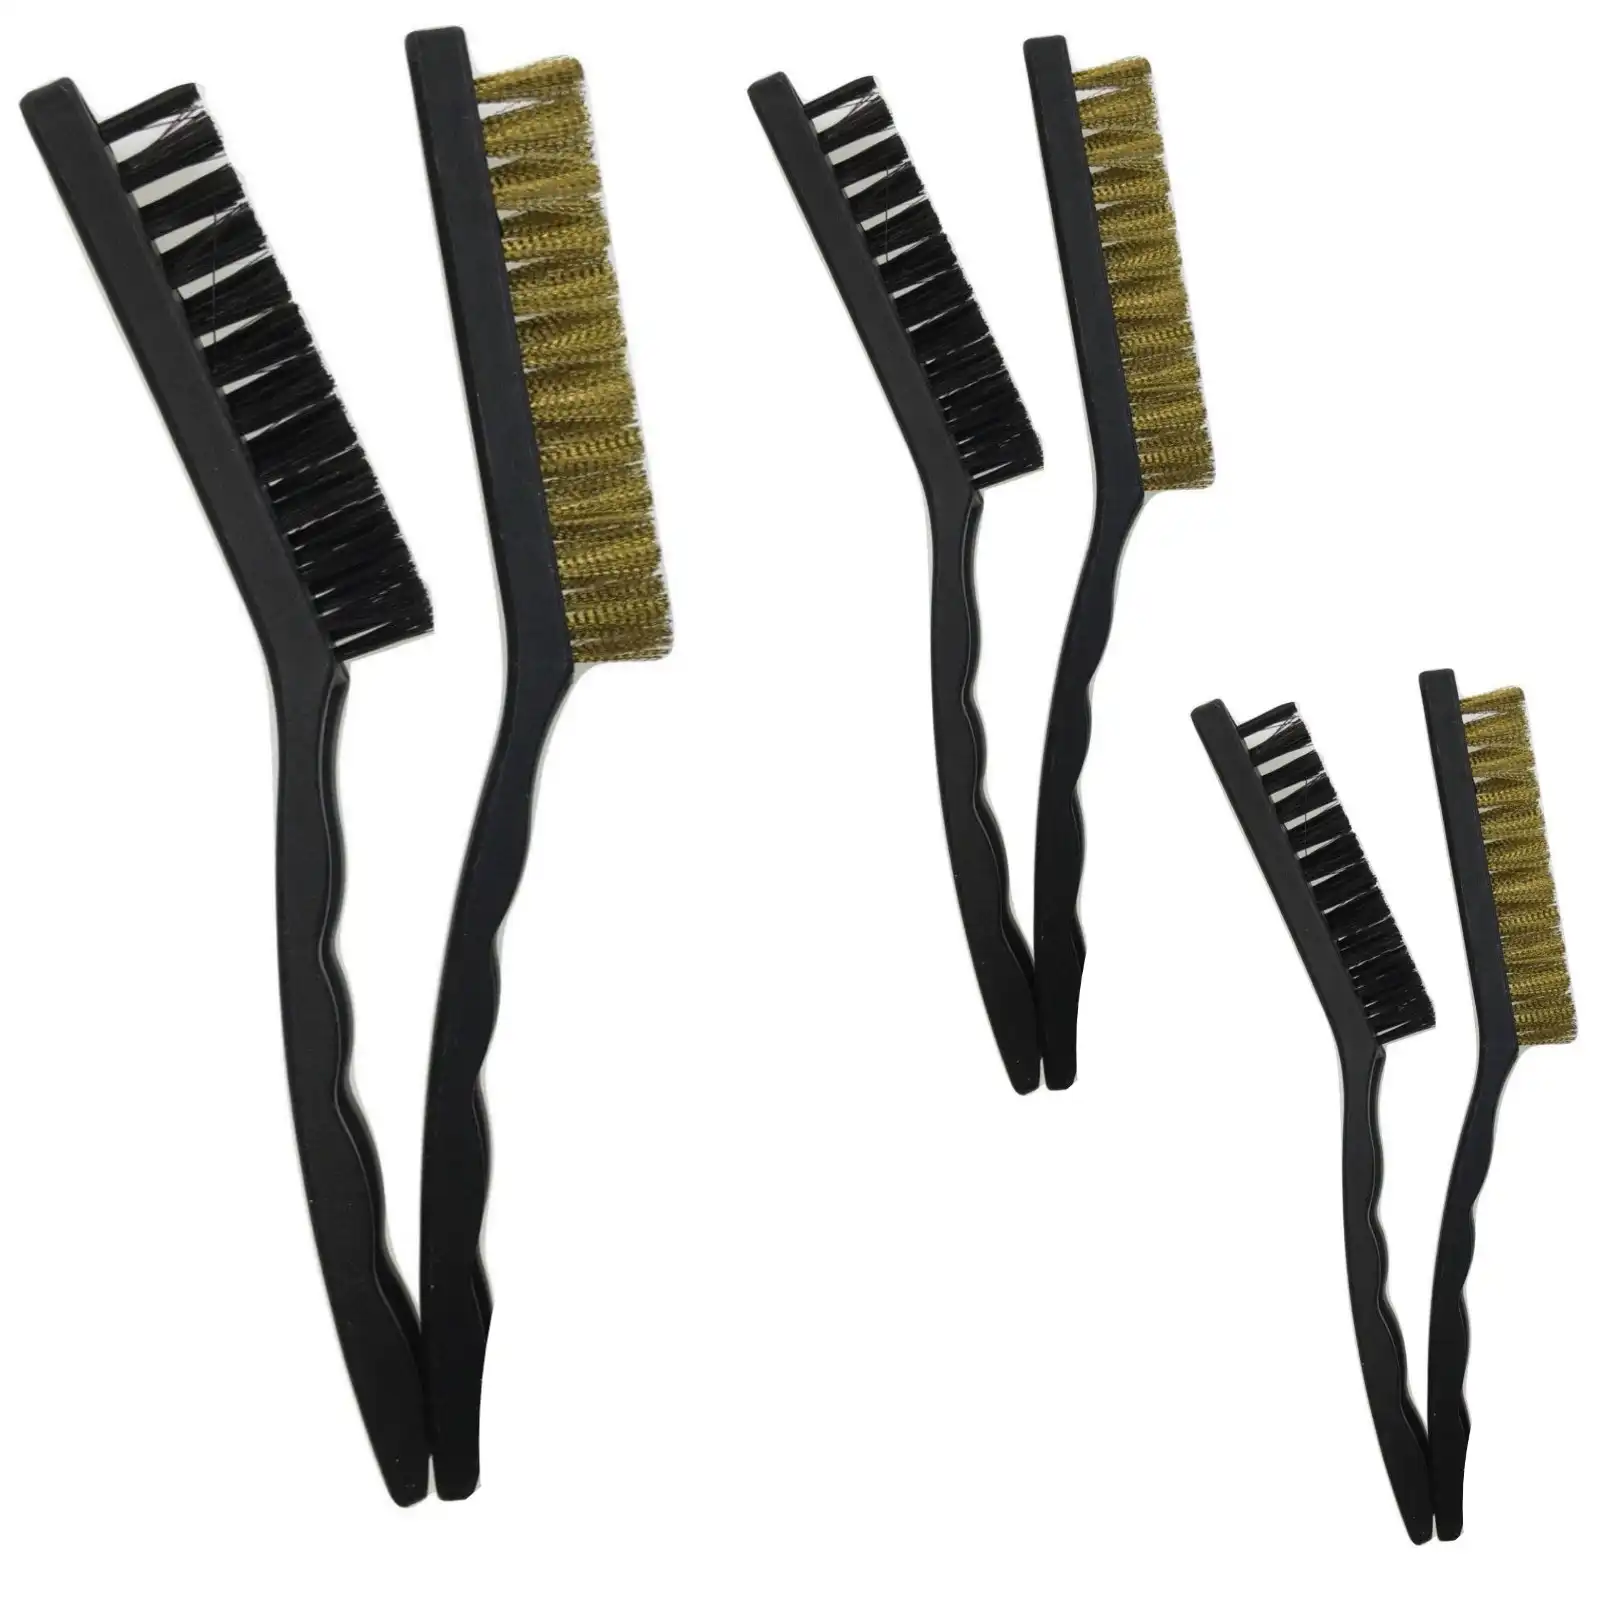 6pcs LARGE WIRE BRUSH SET Steel Cleaning Brushes Brass Metal Tools 21cm